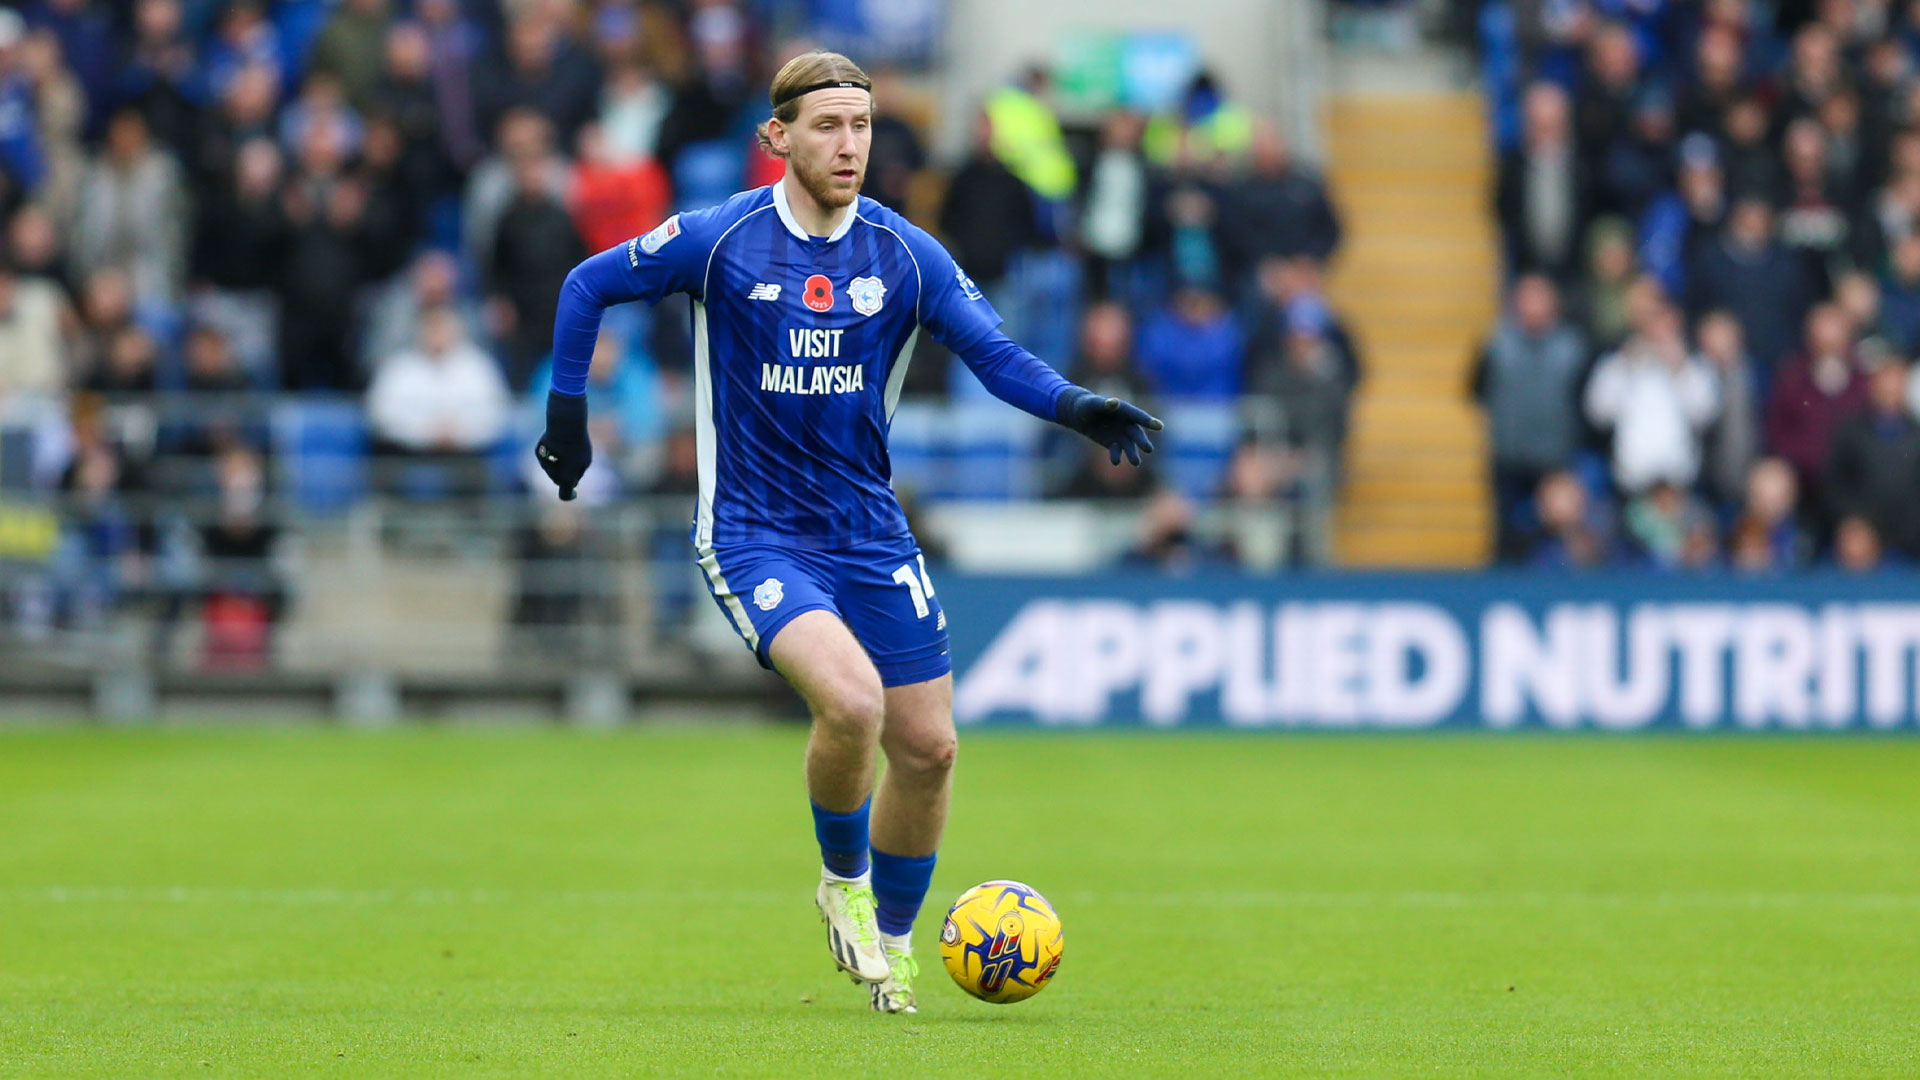 Josh Bowler in action for Cardiff City